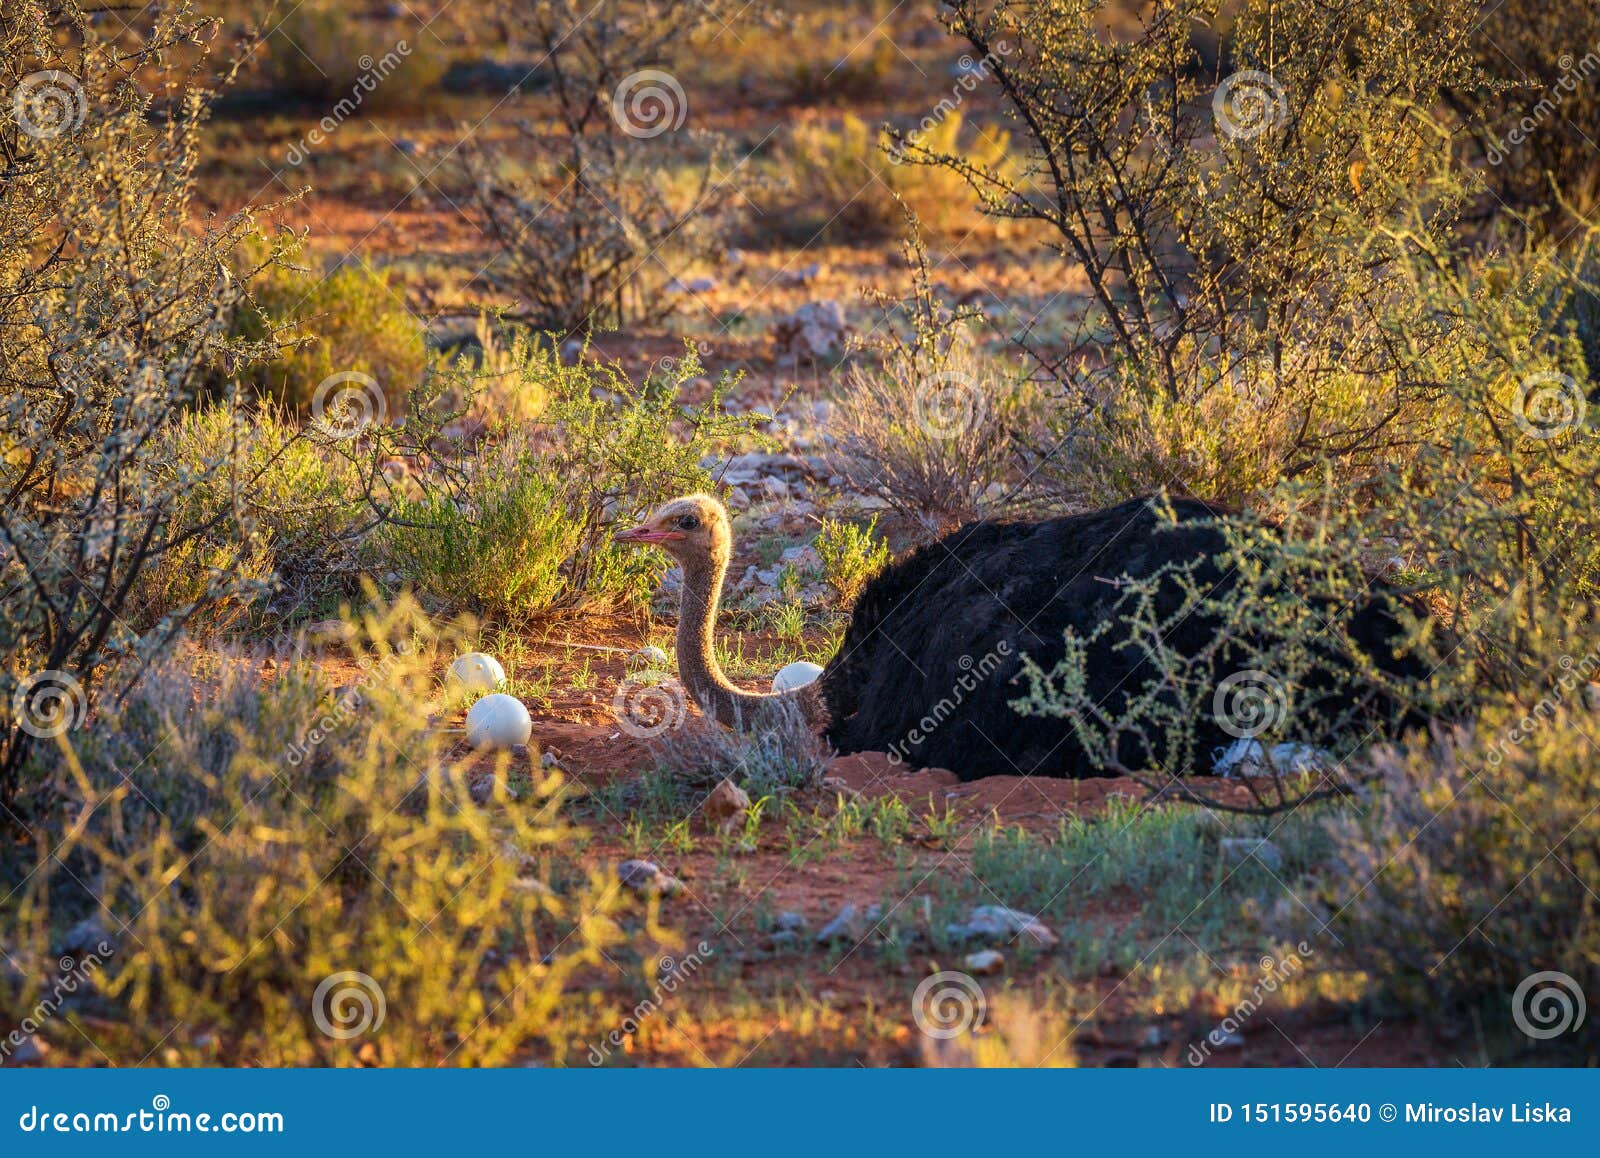 ostrich guarding its eggs in the kalahari desert of namibia